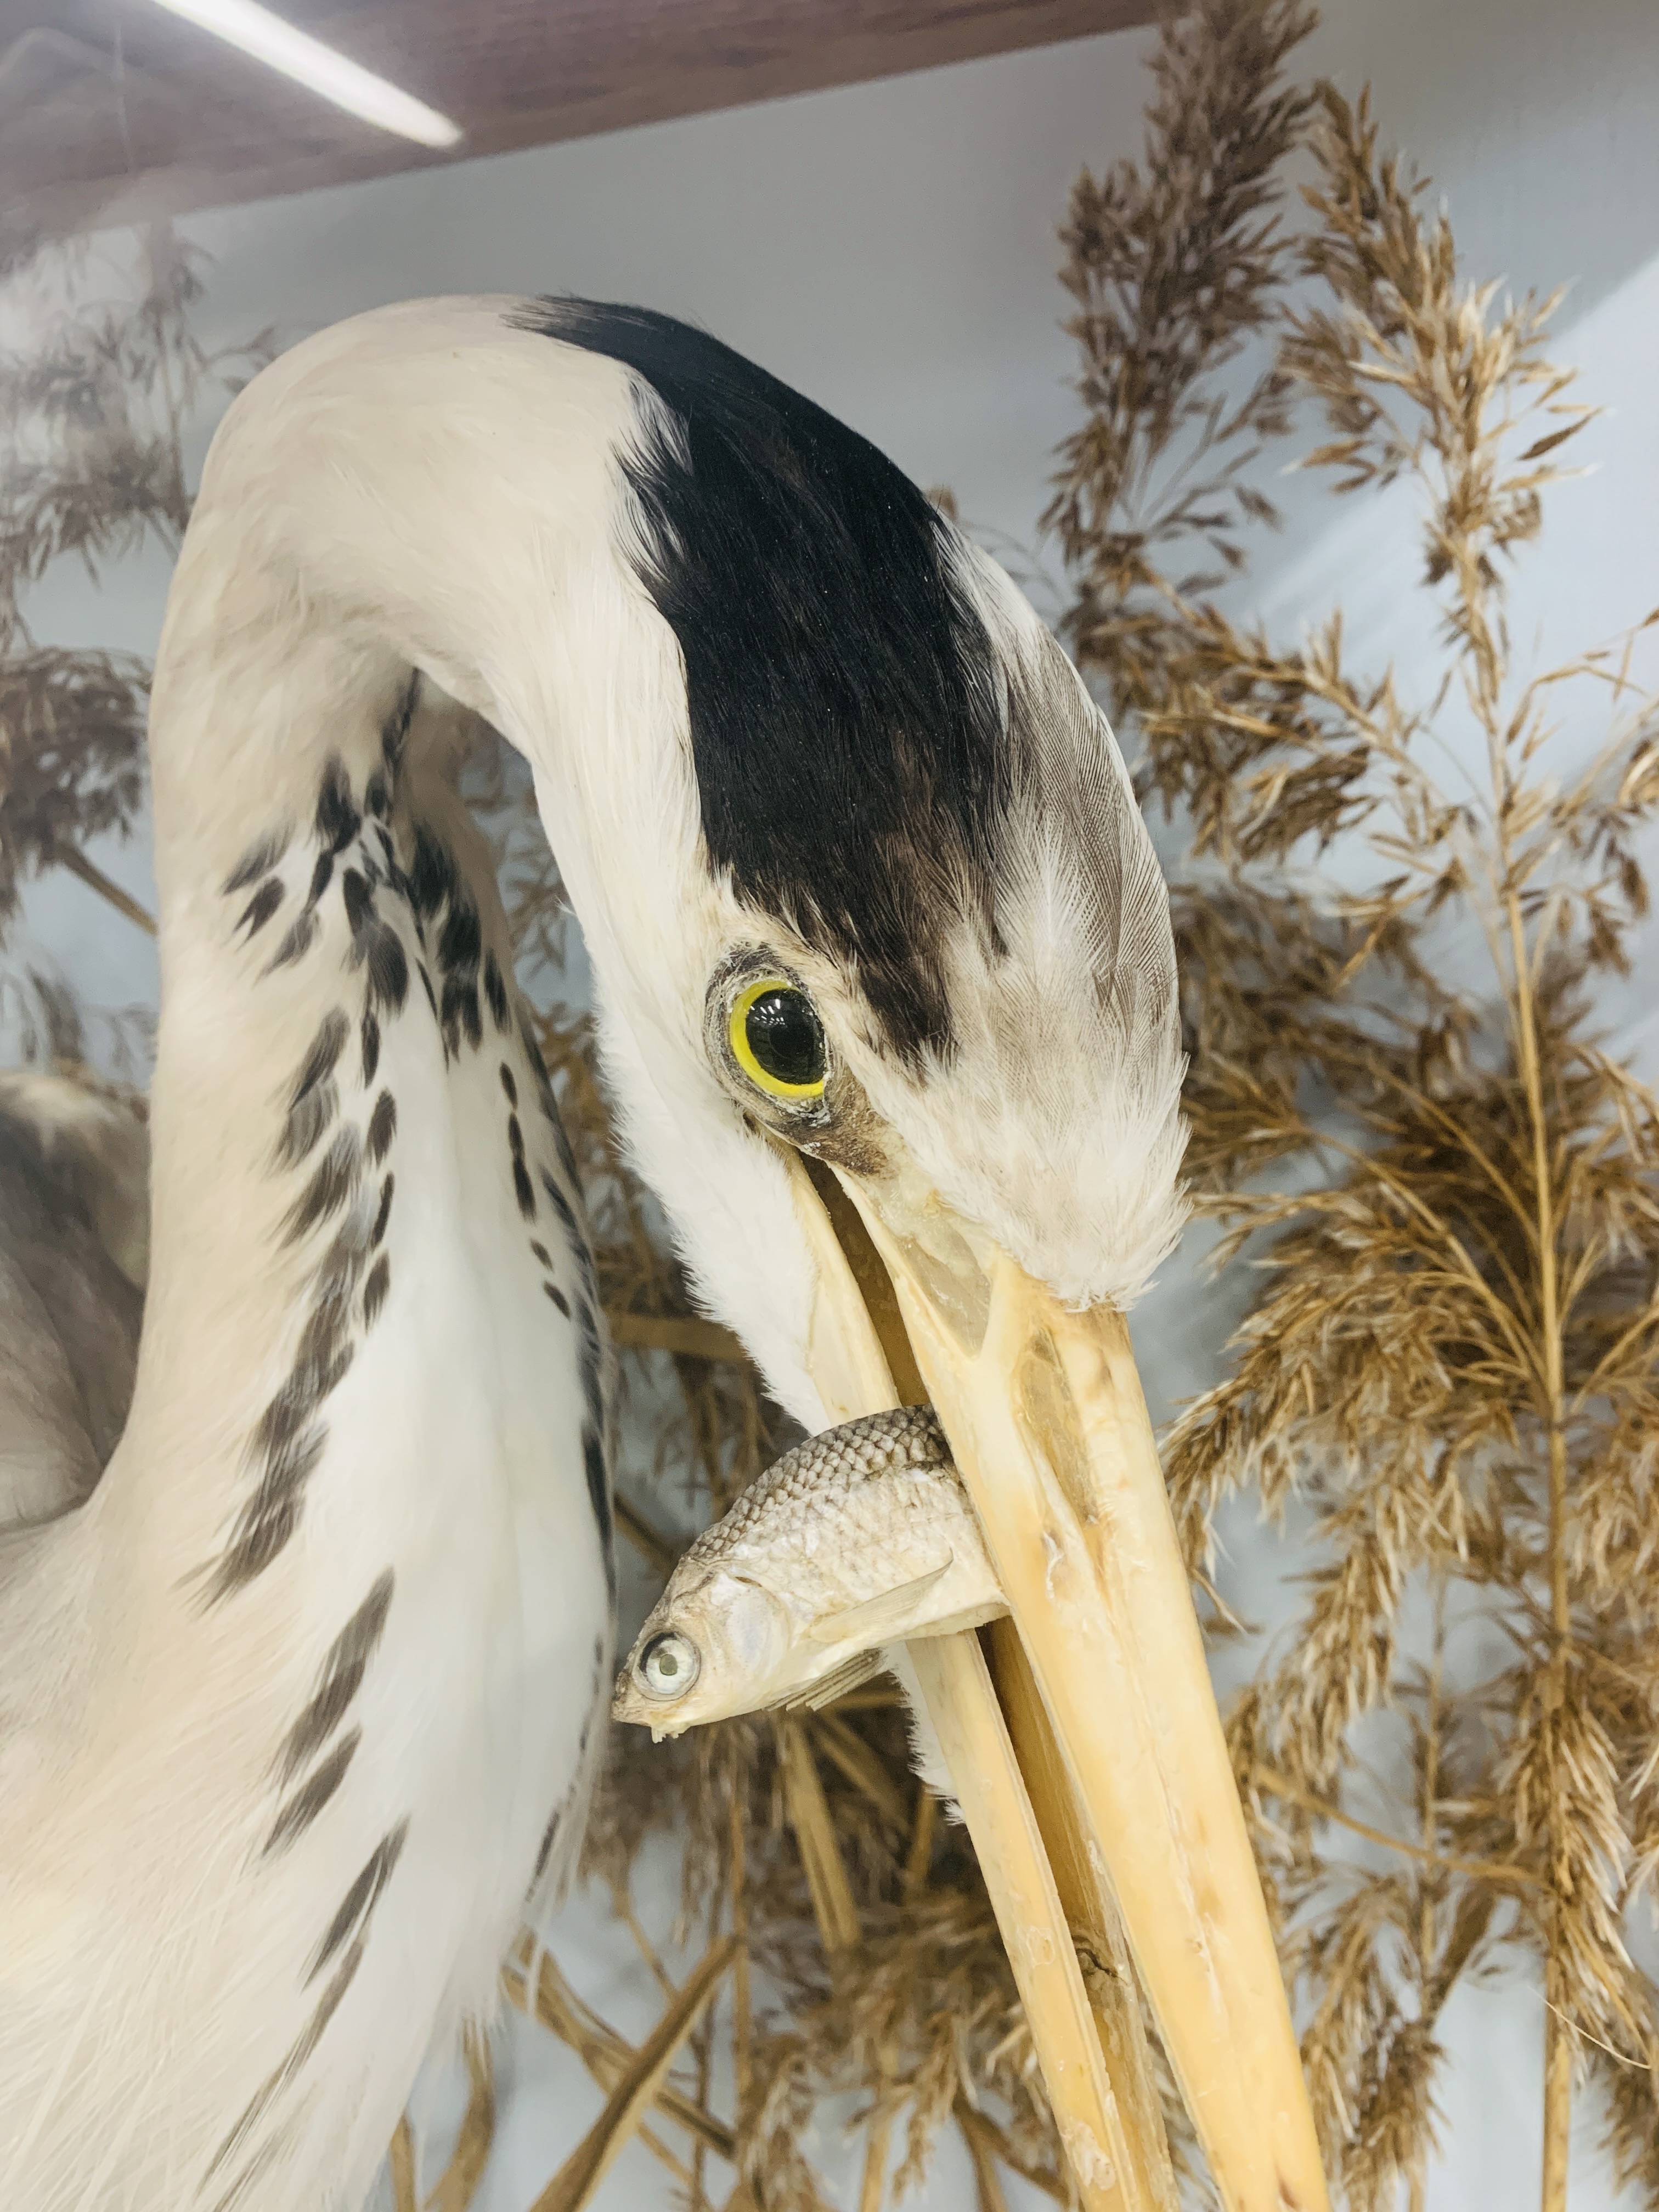 VICTORIAN TAXIDERMY STUDY OF A STANDING HERON HOLDING FISH, - Image 9 of 9